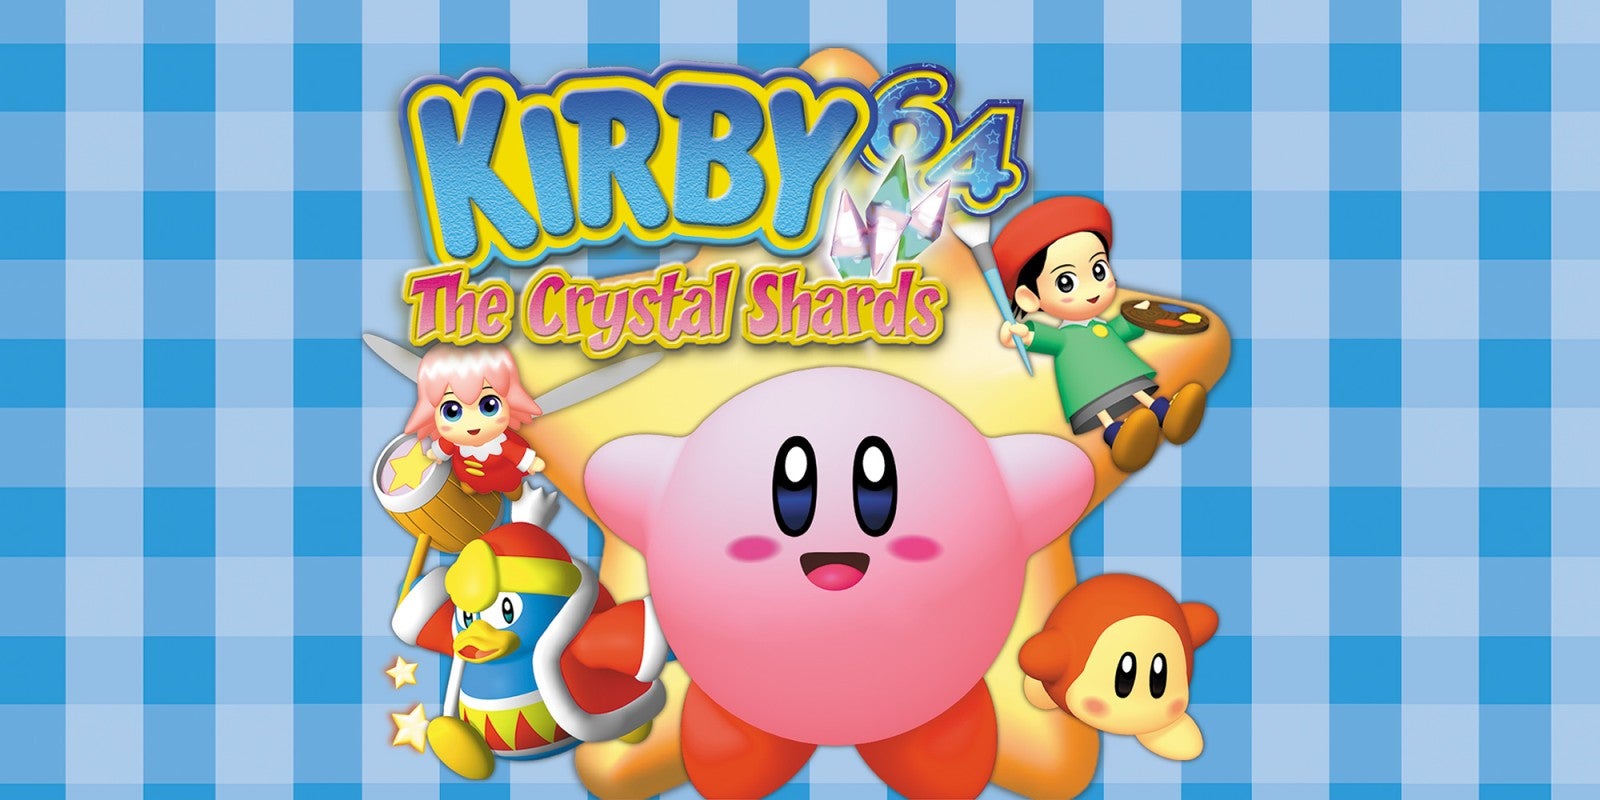 Image for On Kirby 64 and Impressionism